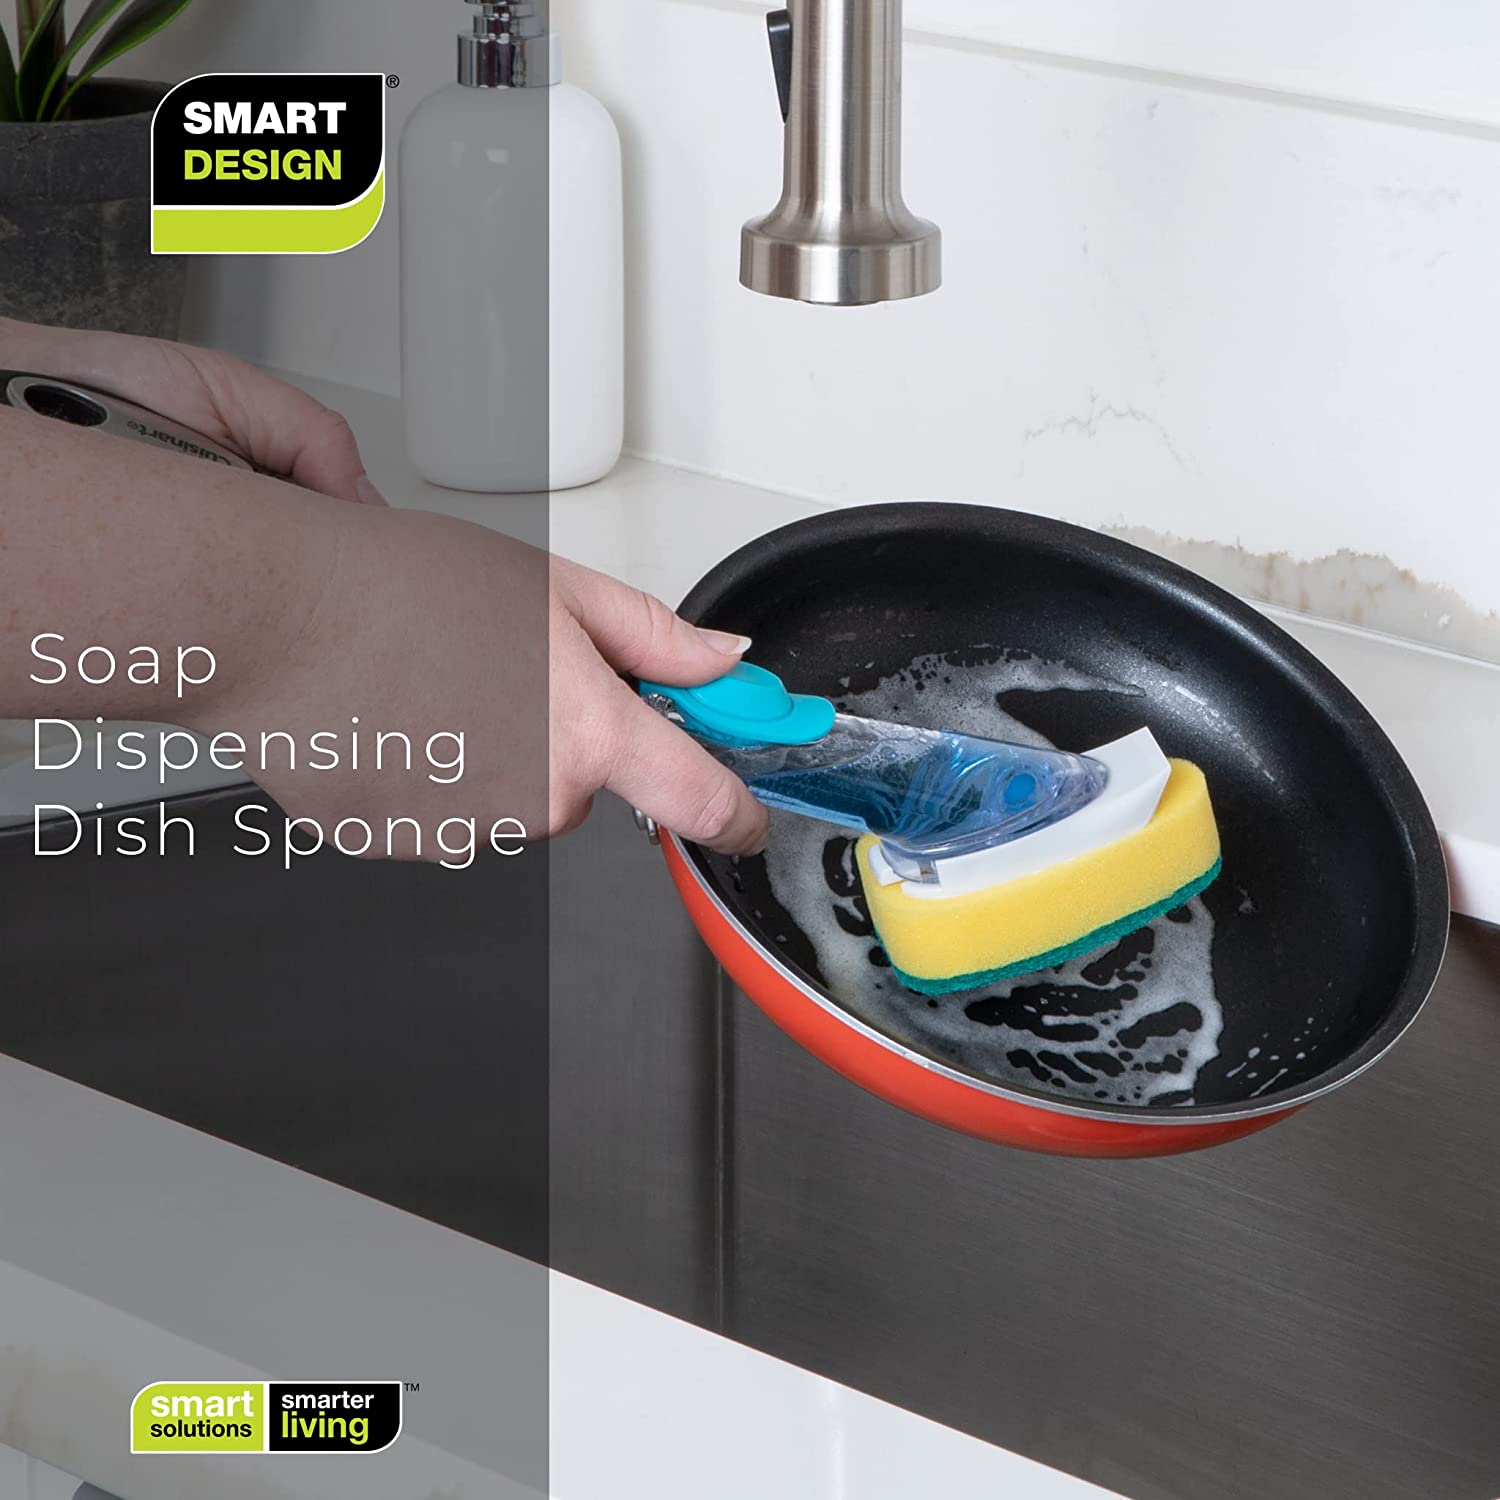 Smart Design Soap Dispensing Dish Brush with Replaceable Head - Non-Slip  Handle with Soap Reservoir - No-Leak Valve - Odor Resistant - Cleaning  Pots, Pans, Plates & Sink - 10 - Gray